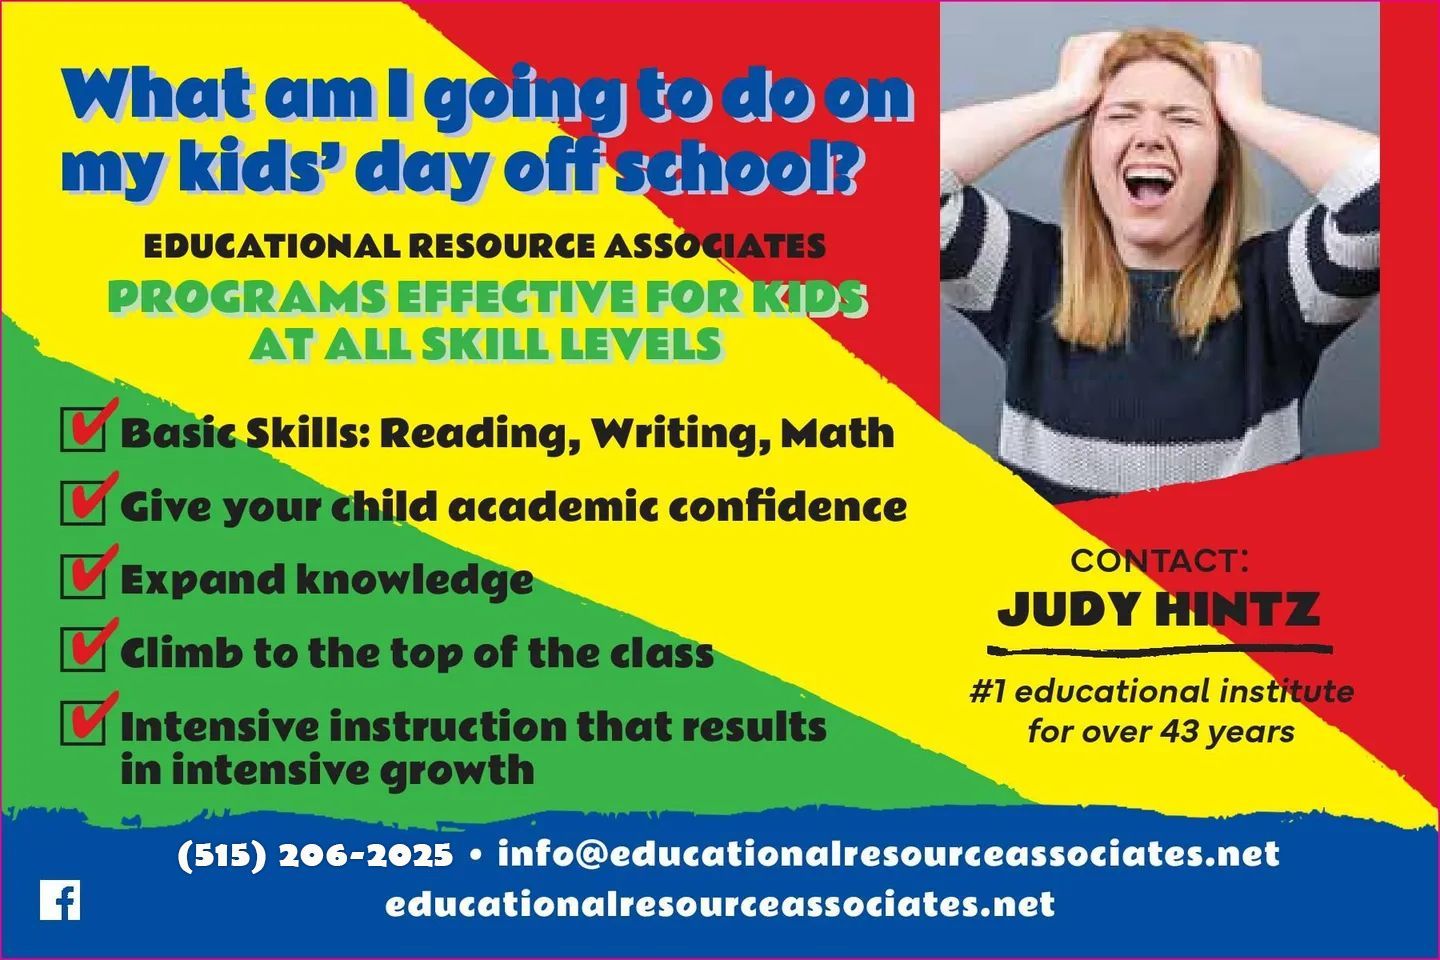 An advertisement for educational resources associates shows a woman screaming